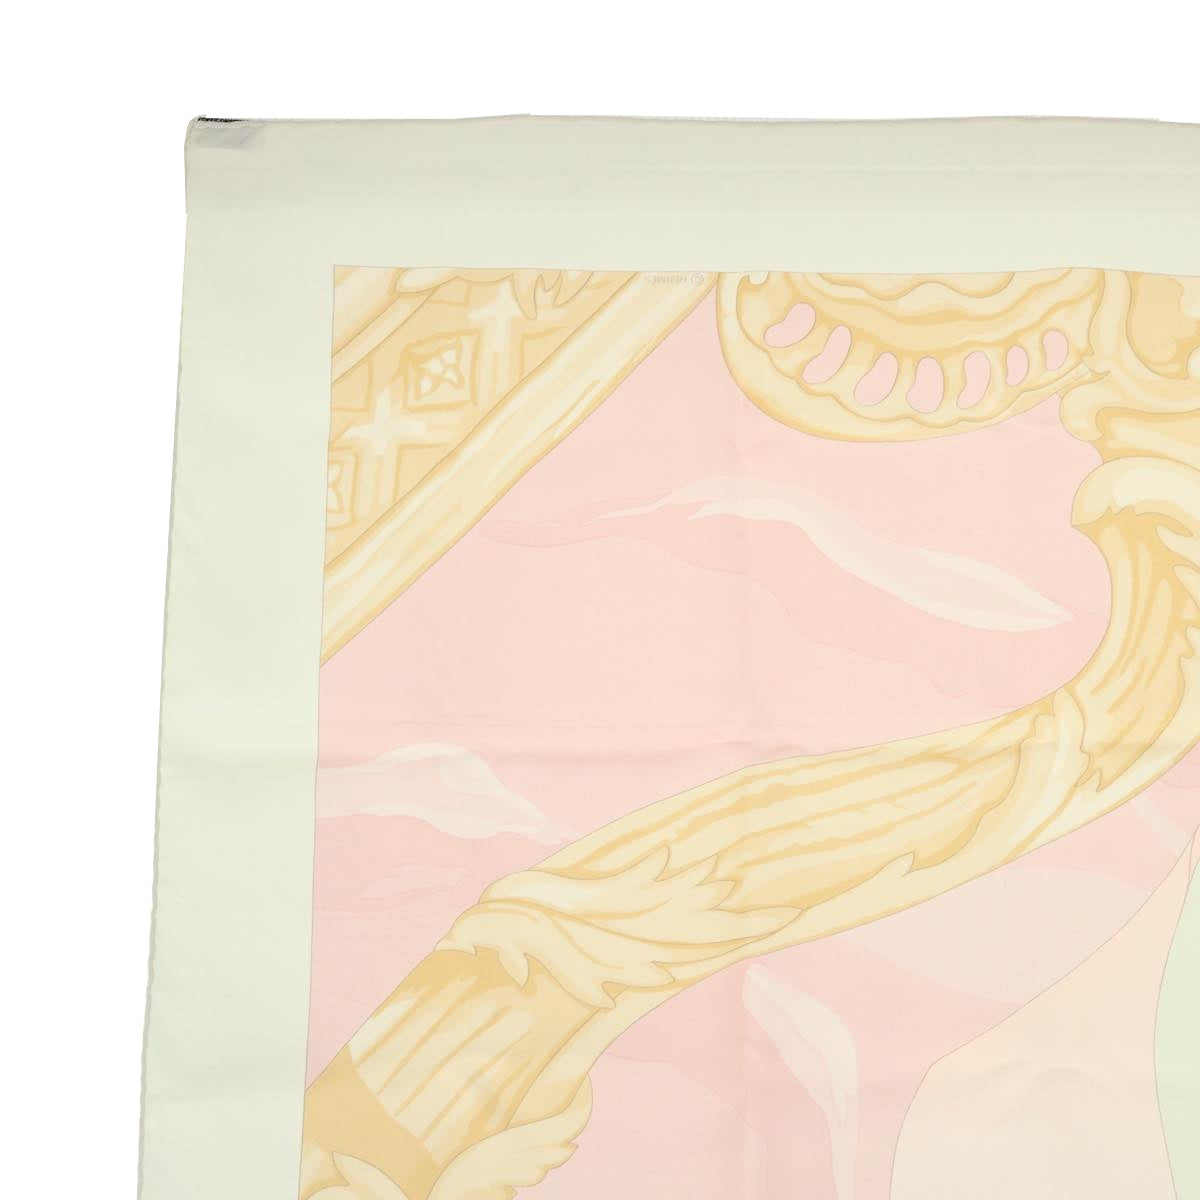 HERMES Carre 90 TURQUERIES 2 Scarf Silk Pink Beige Light blue Auth 51076 - 0